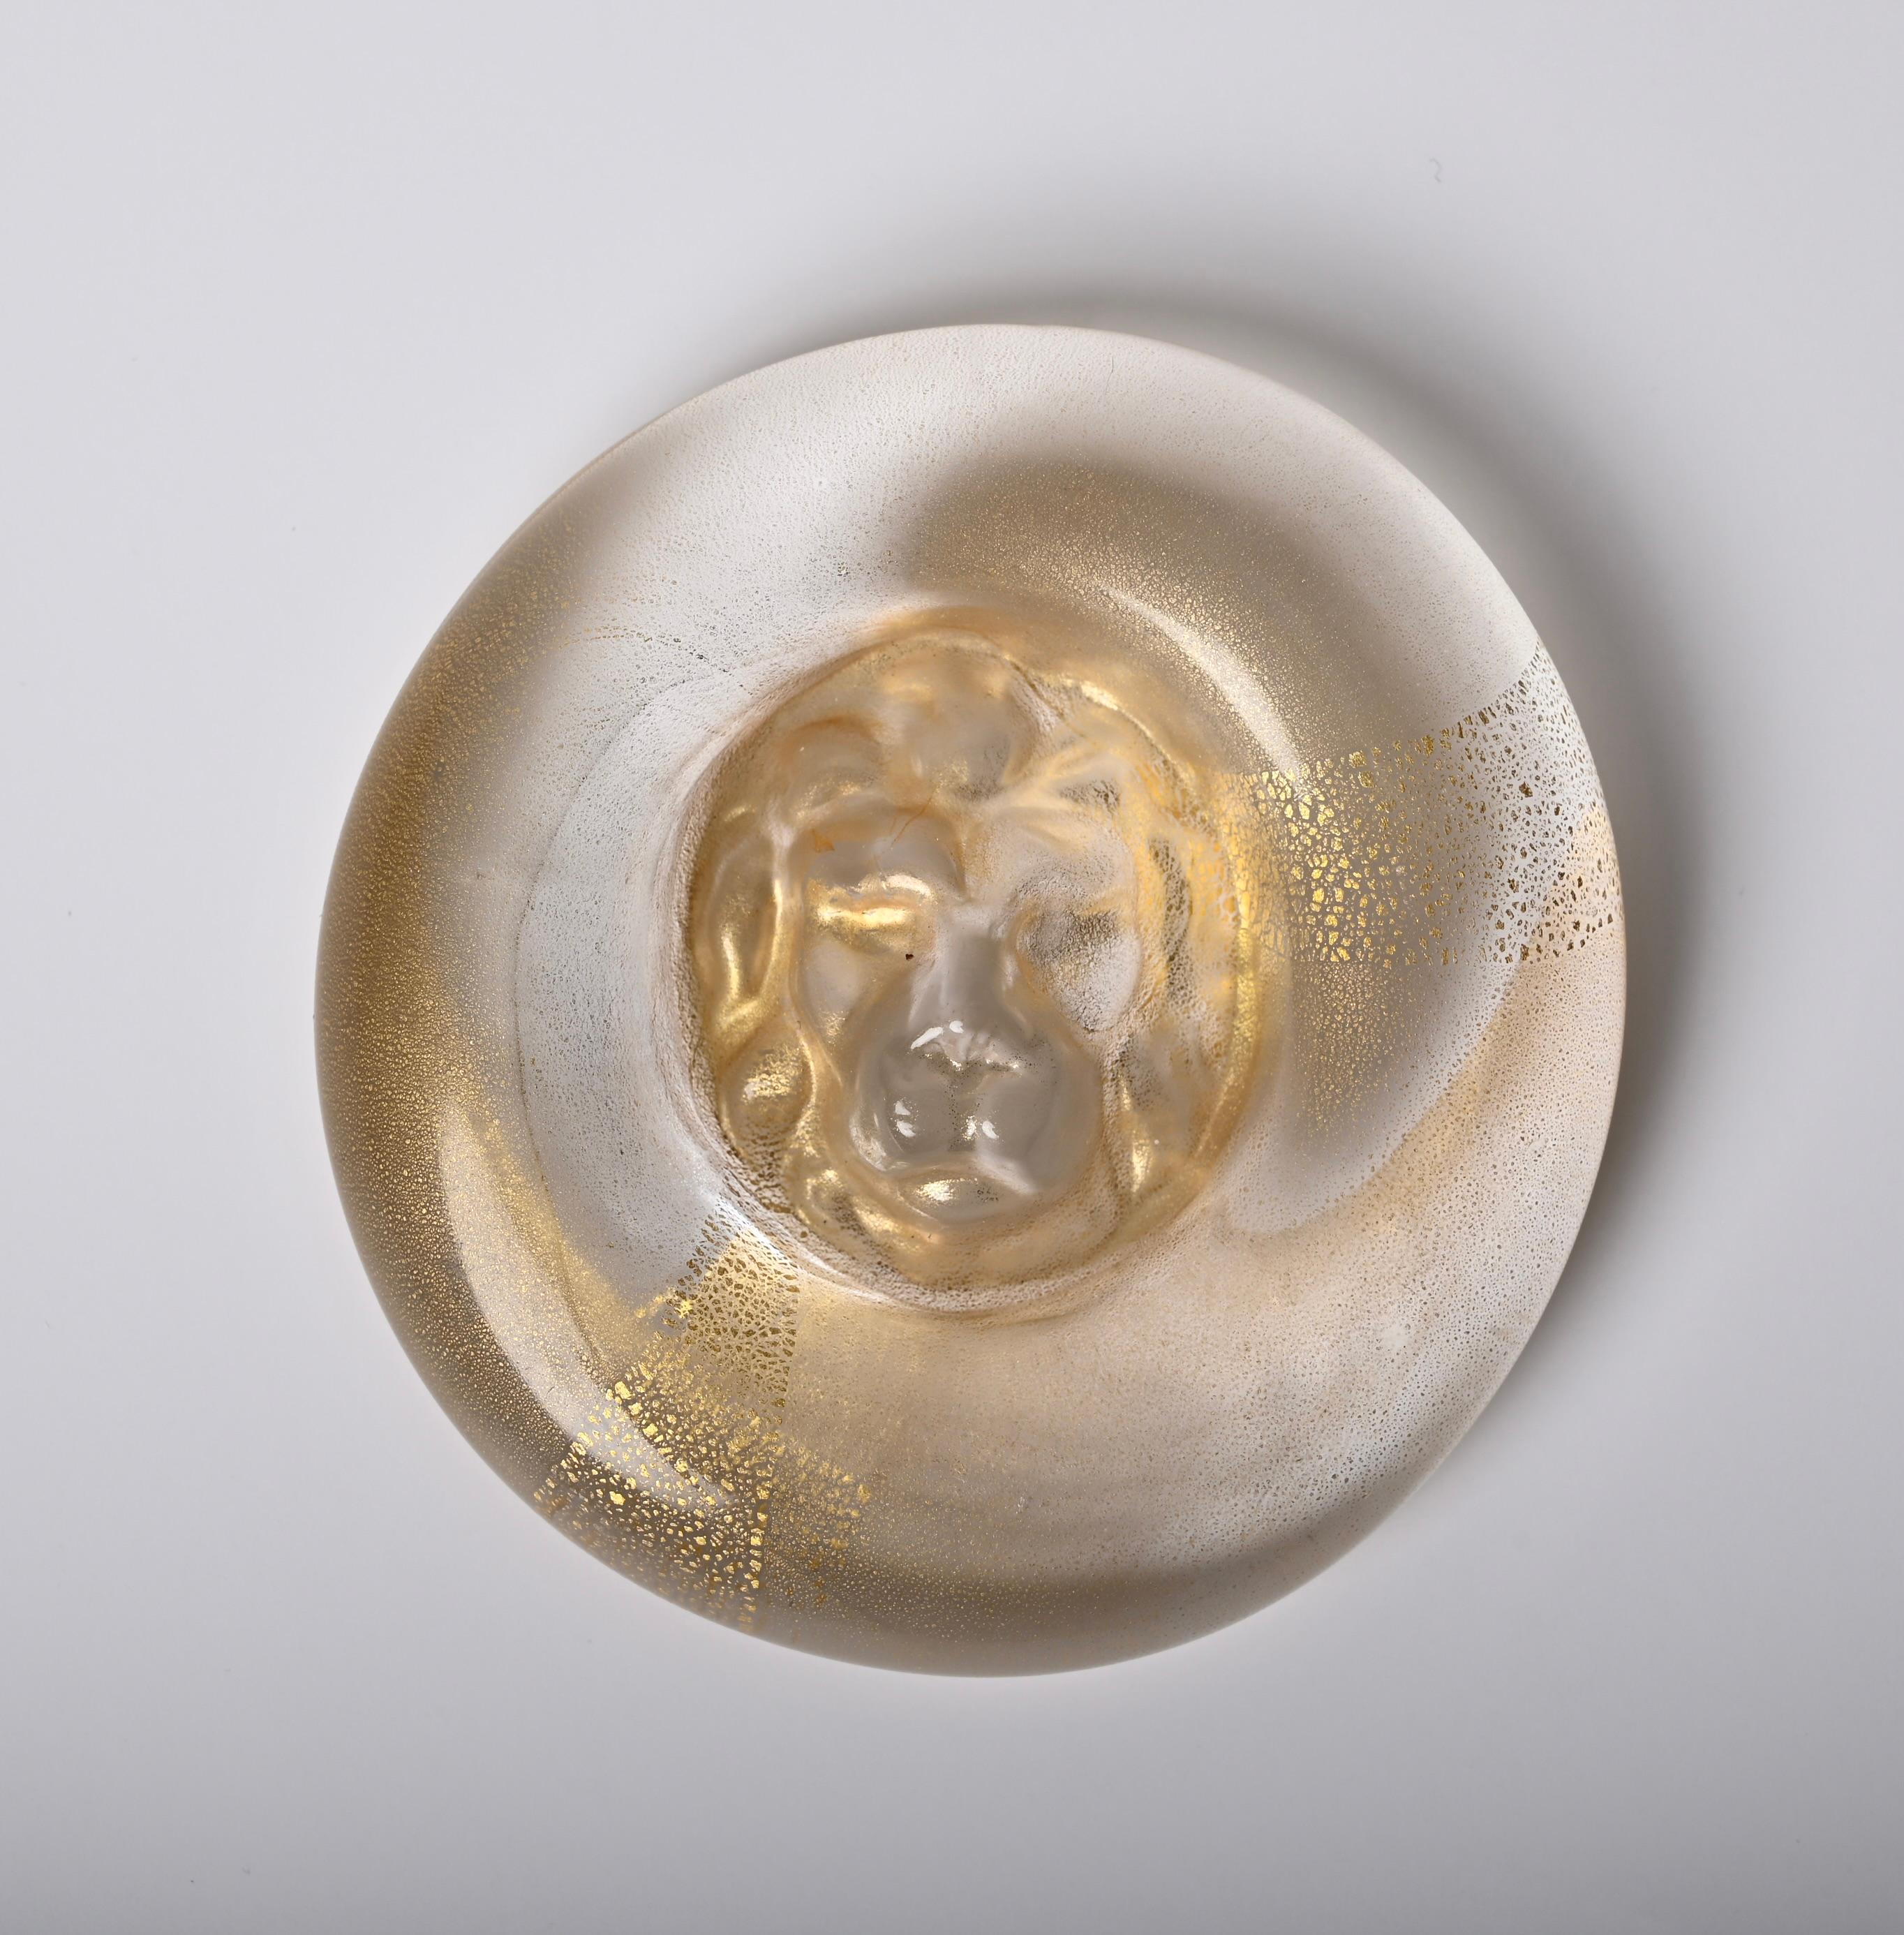 Stunning midcentury golden and crystal Murano glass lion-shaped paperweight. Giampaolo Nason designed this fantastic piece in Murano, Venezia (Italy), during the 1970s.

This paperweight is unique thanks to the astonishing lion head decoration and